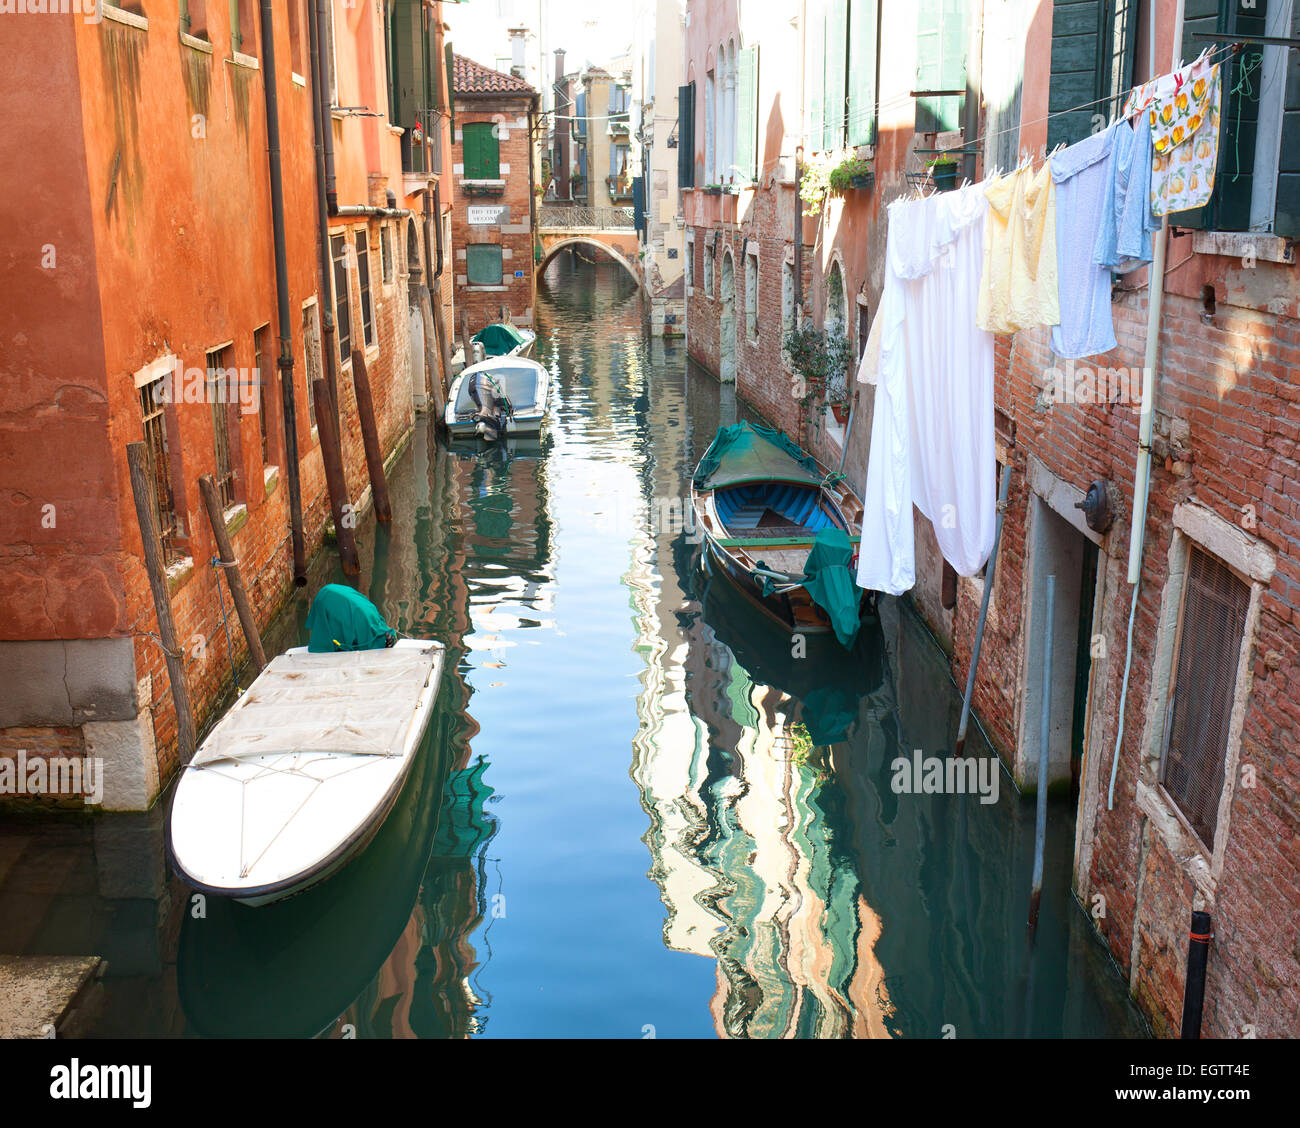 Venetian canal with boats and clothes hanging out to dry, Venice, Italy. Stock Photo